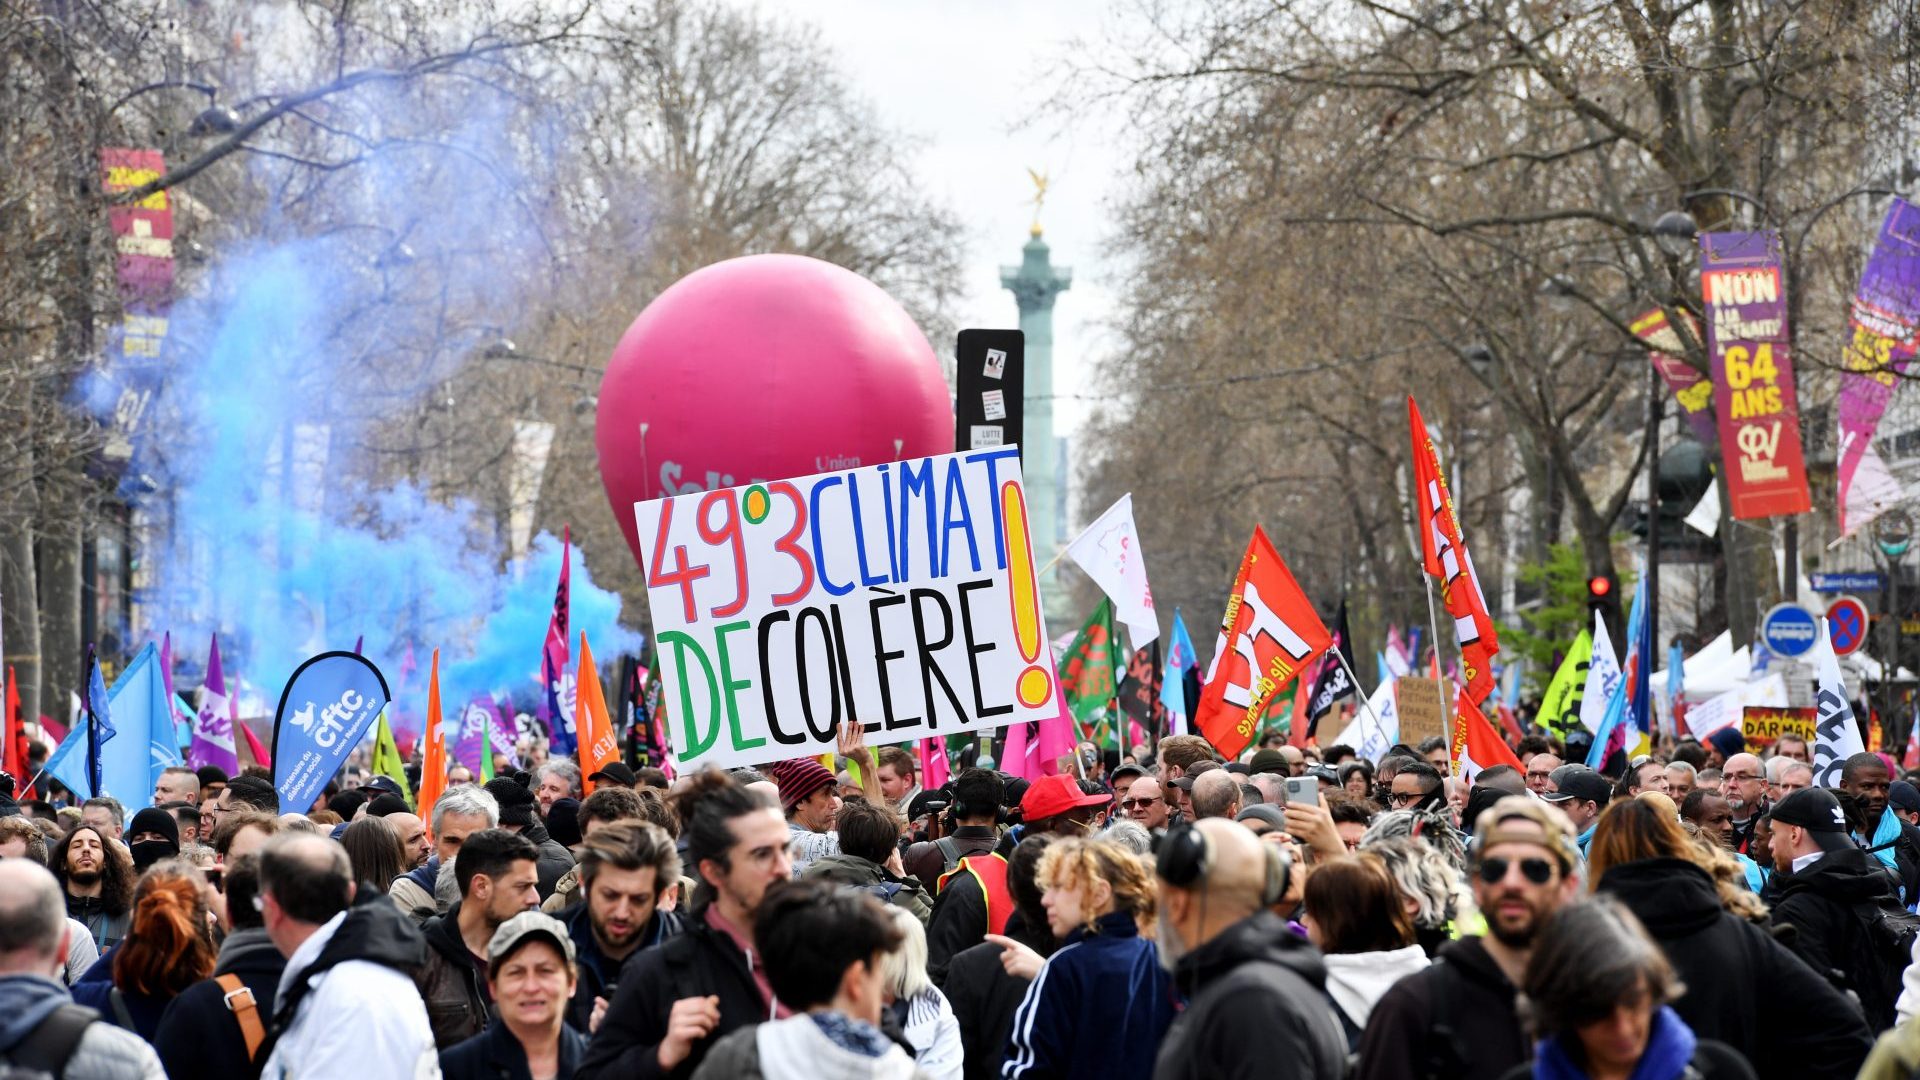 A sign reads: "49°3 Climate of anger!" during the demonstration in Paris against the reform extending the retirement age to 64. Photo: Fred VIELCANET/Gamma-Rapho via Getty Images